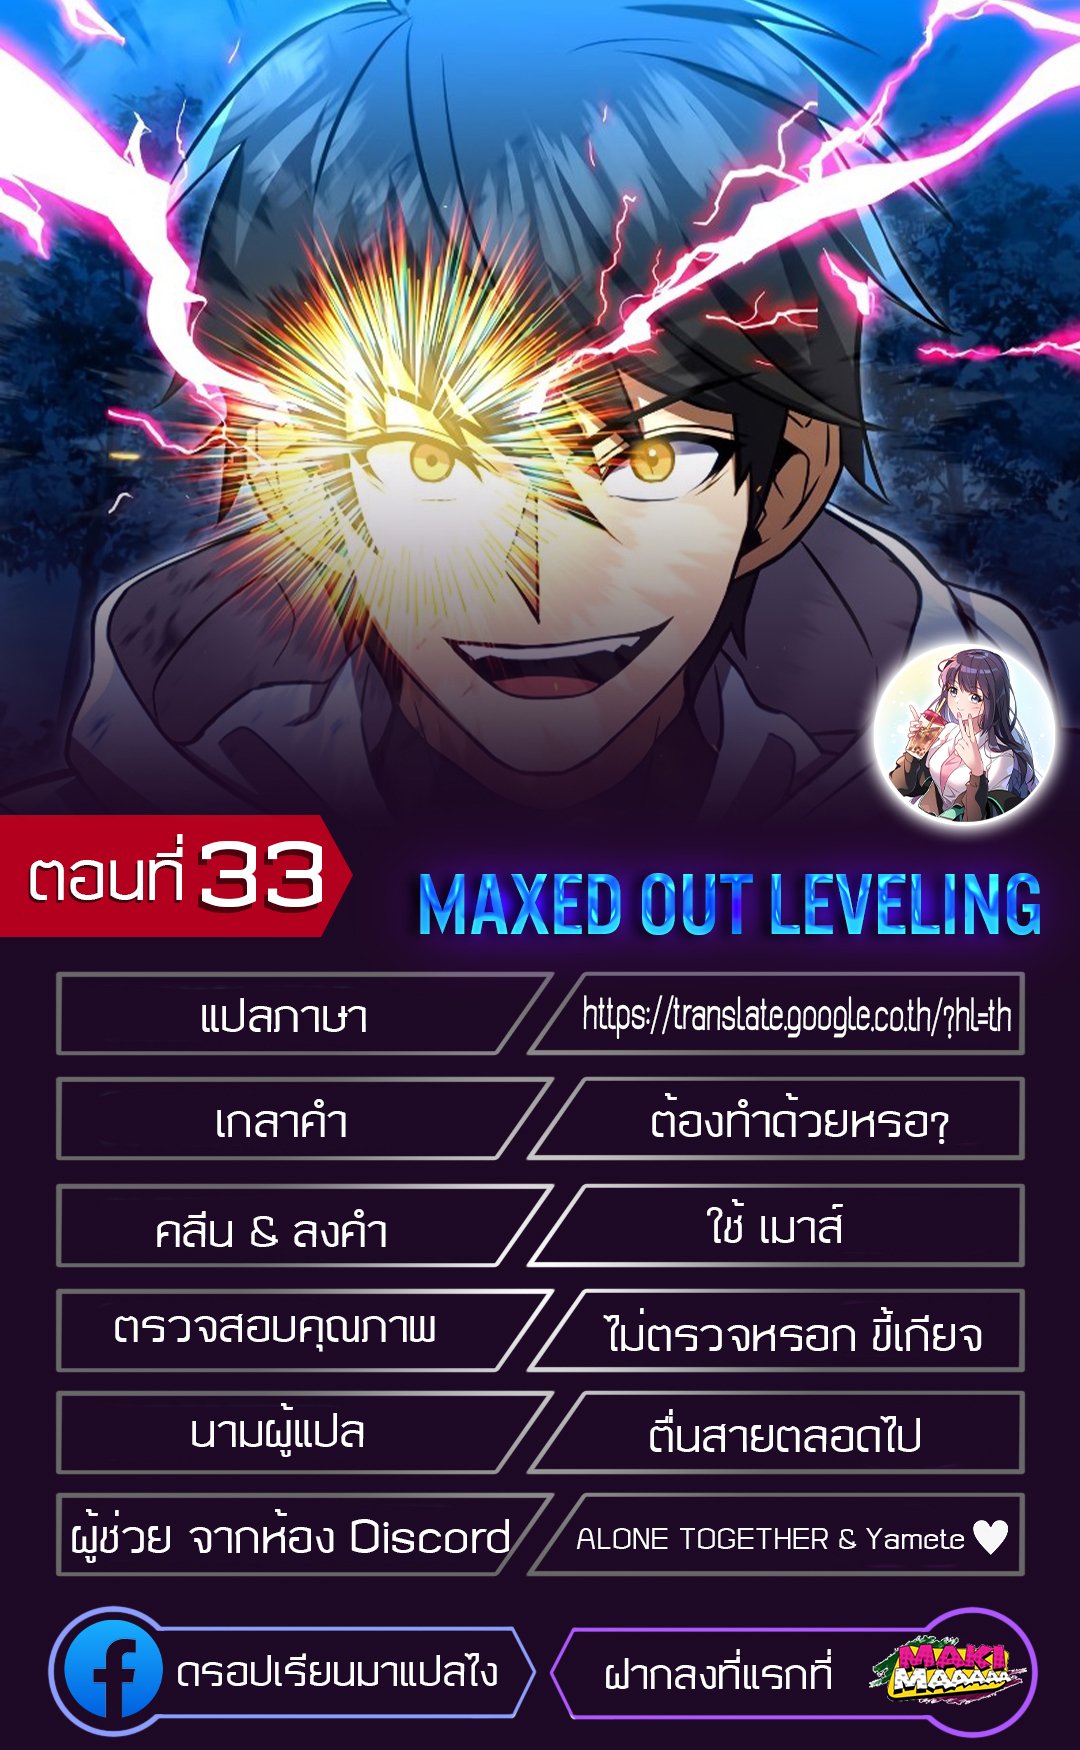 Maxed Out Leveling33 1